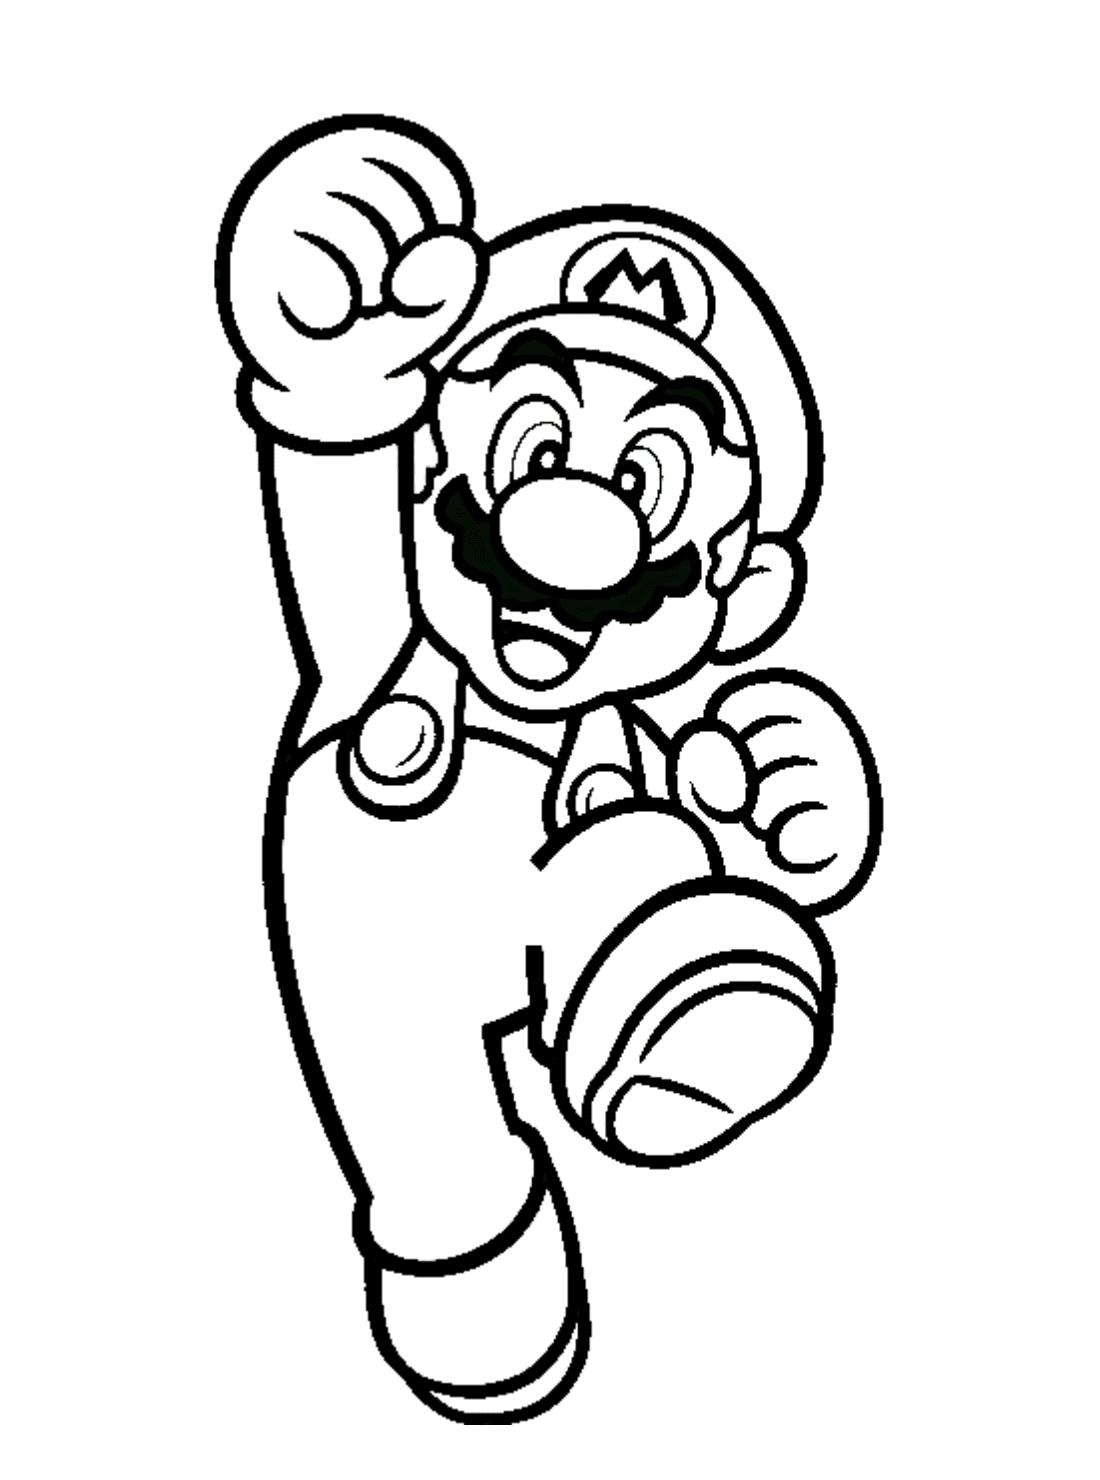 Super Mario Fighting - Coloring Online Free